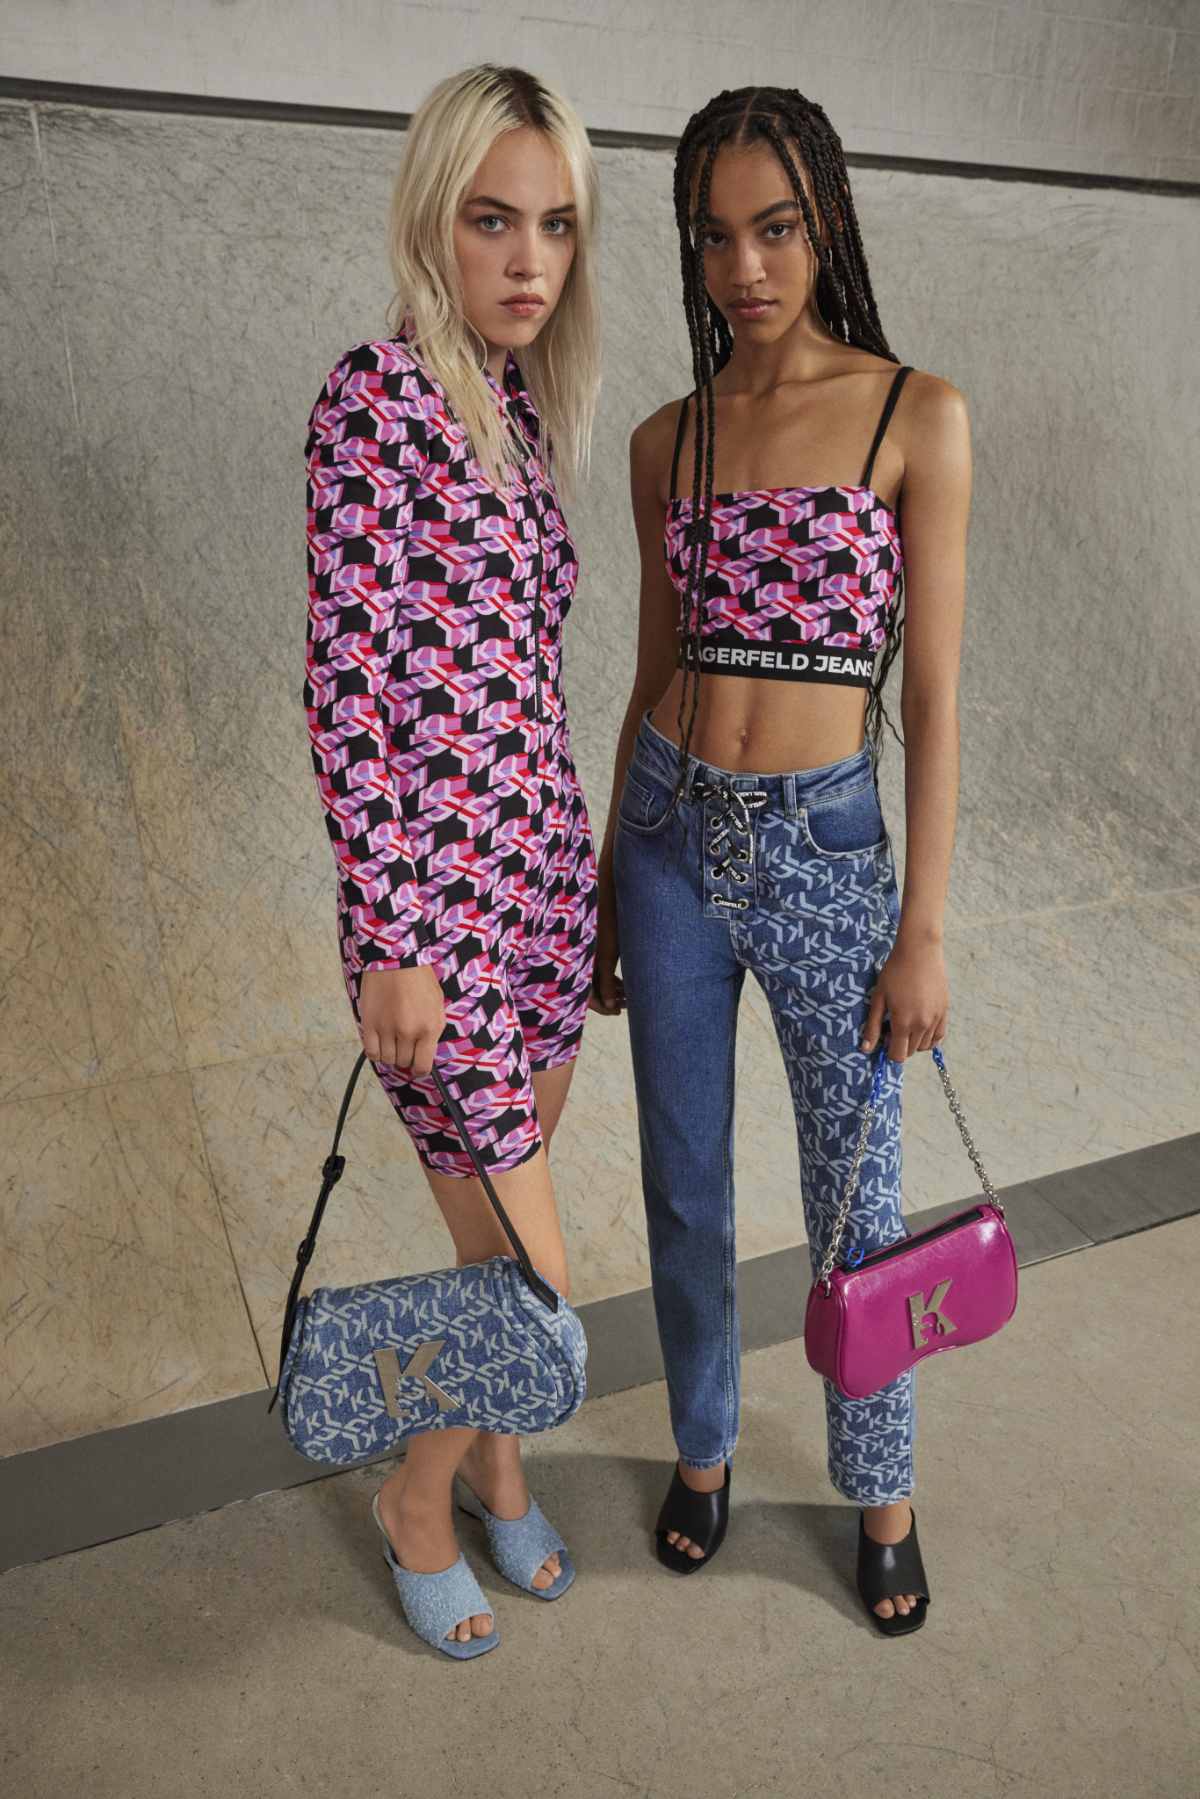 Karl Lagerfeld Jeans Presents Its New Spring-Summer 2024 Collection